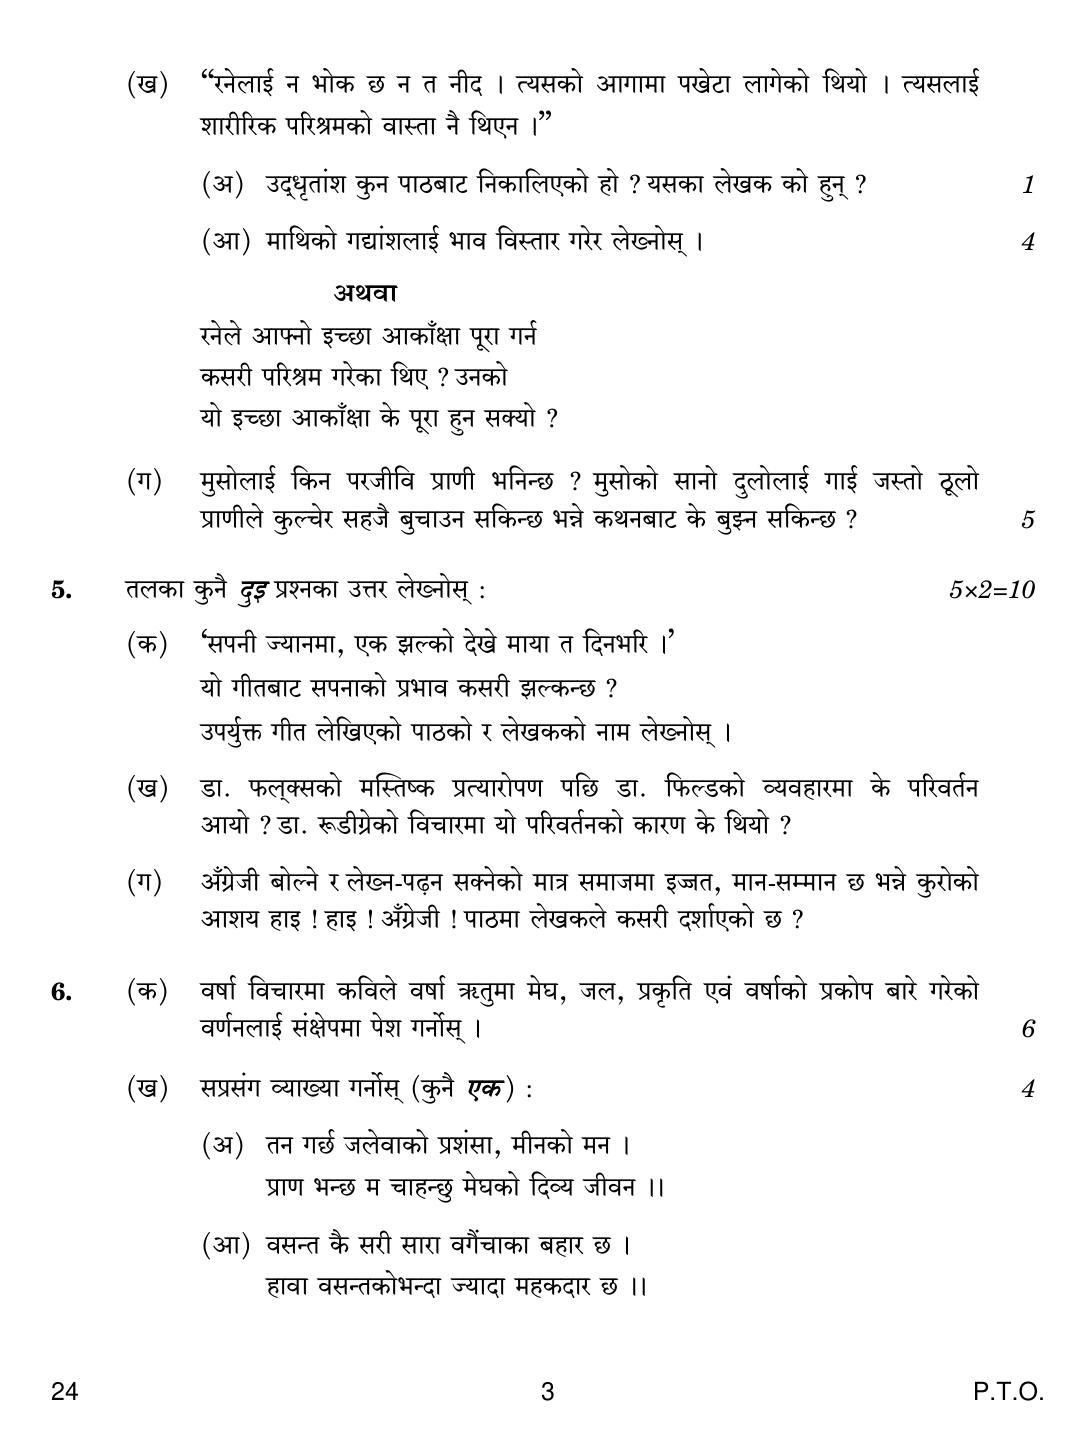 CBSE Class 12 24 NEPALI 2019 Compartment Question Paper - Page 3